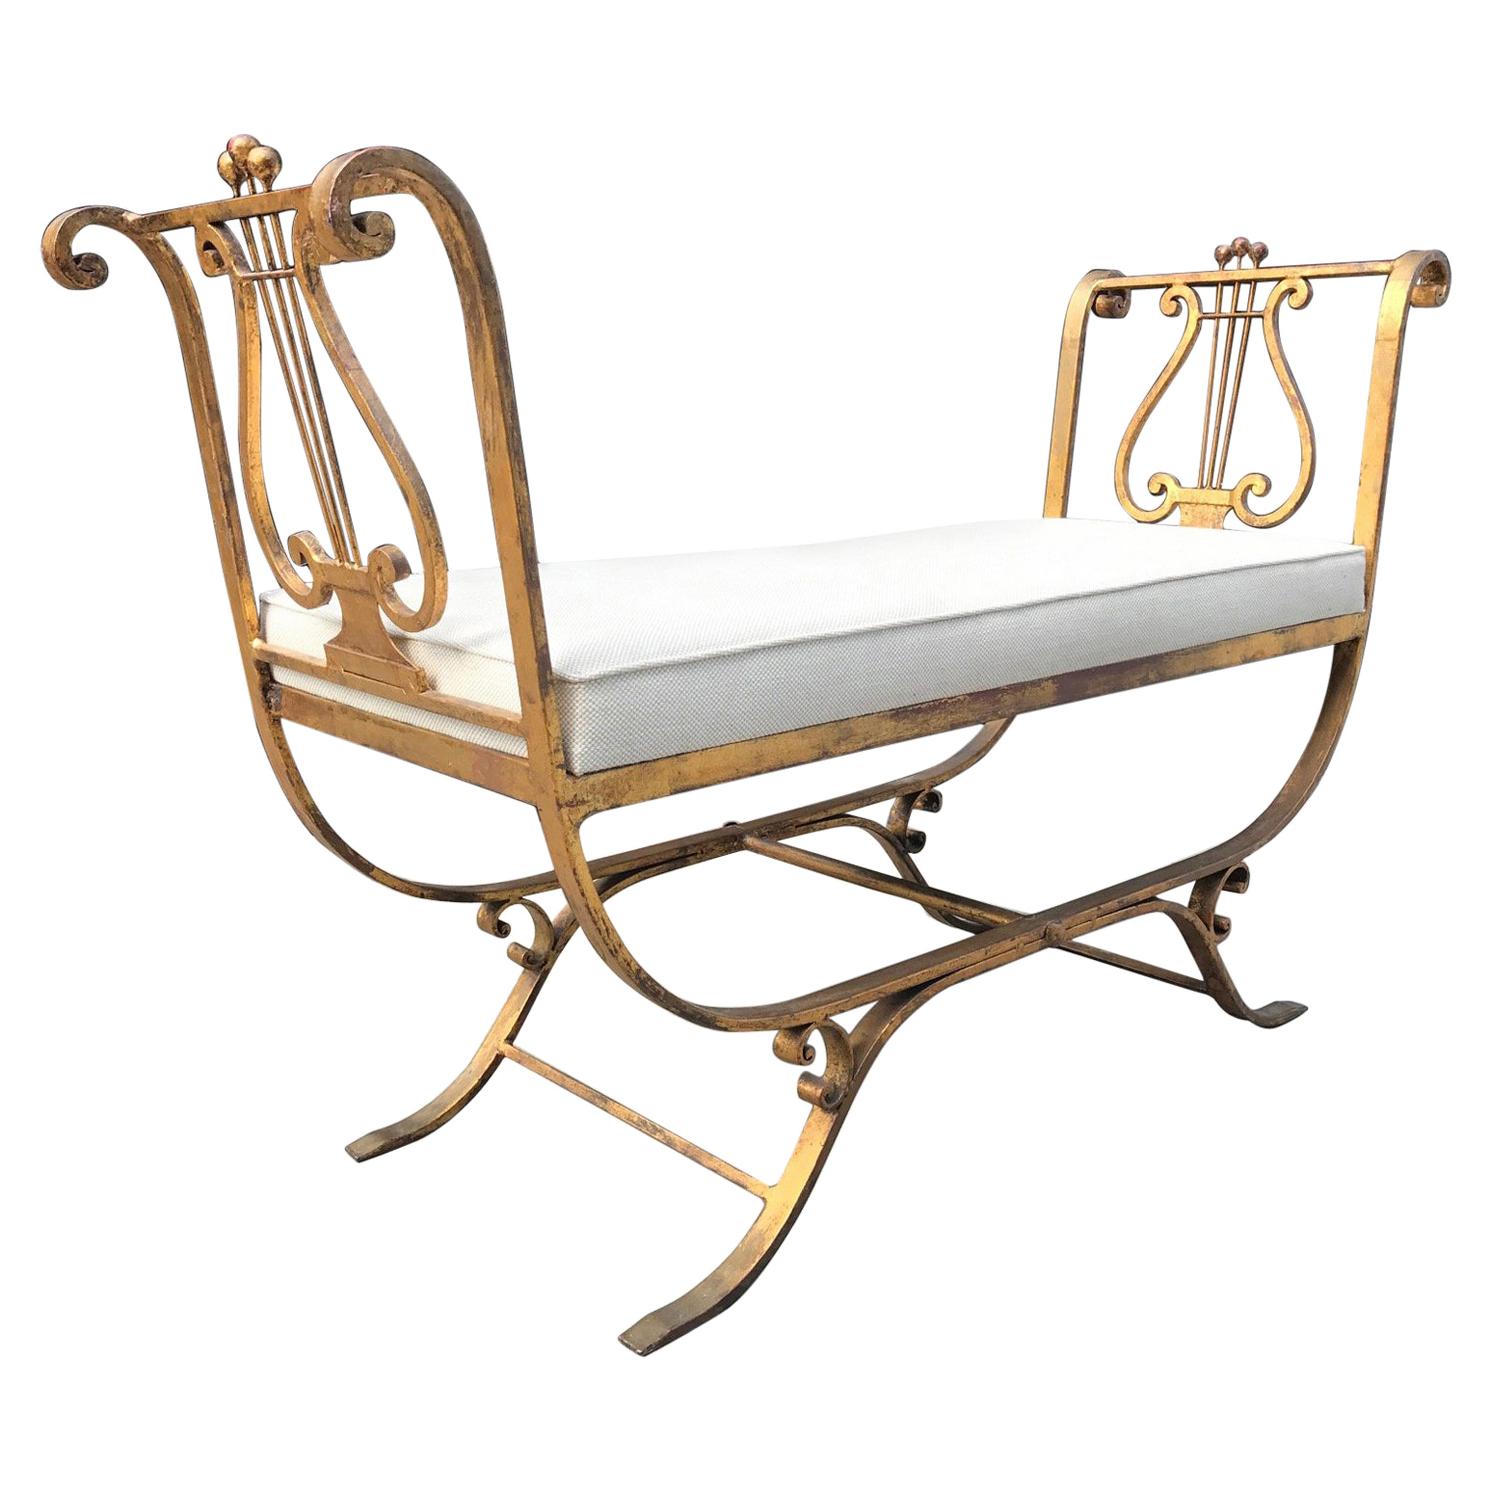 1950s Neoclassical Style Gold Gilt Iron Bench